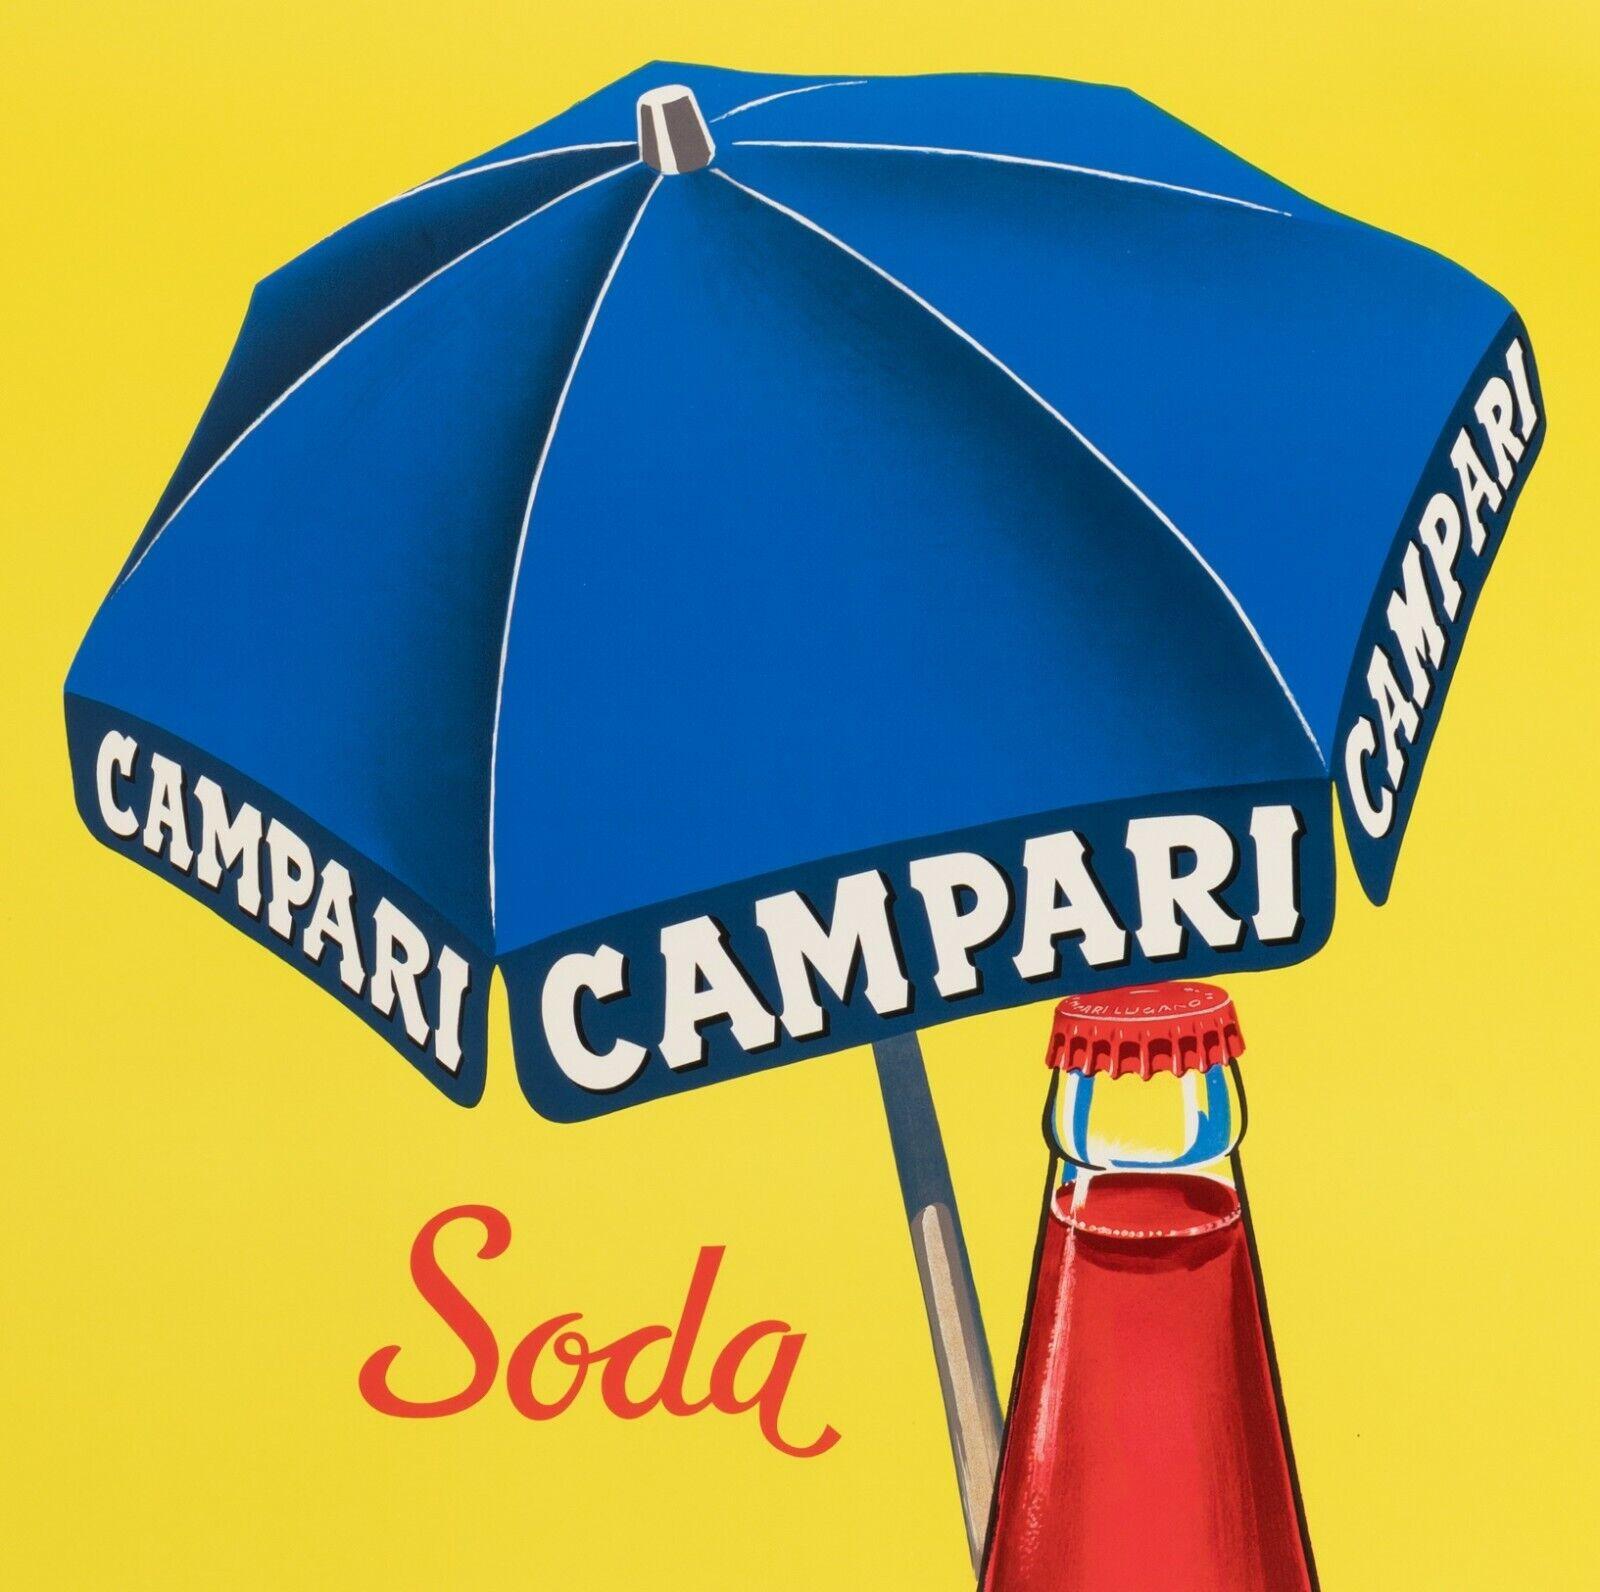 Original vintage poster-Campari Soda Disseta-Plage-Milano-Liqueur, 1970

Campari Soda hydrate in the shade of an umbrella on a beach.
Campari is an Italian company, founded in Milan in 1860, producing a bright red amaro, scented with orange peel